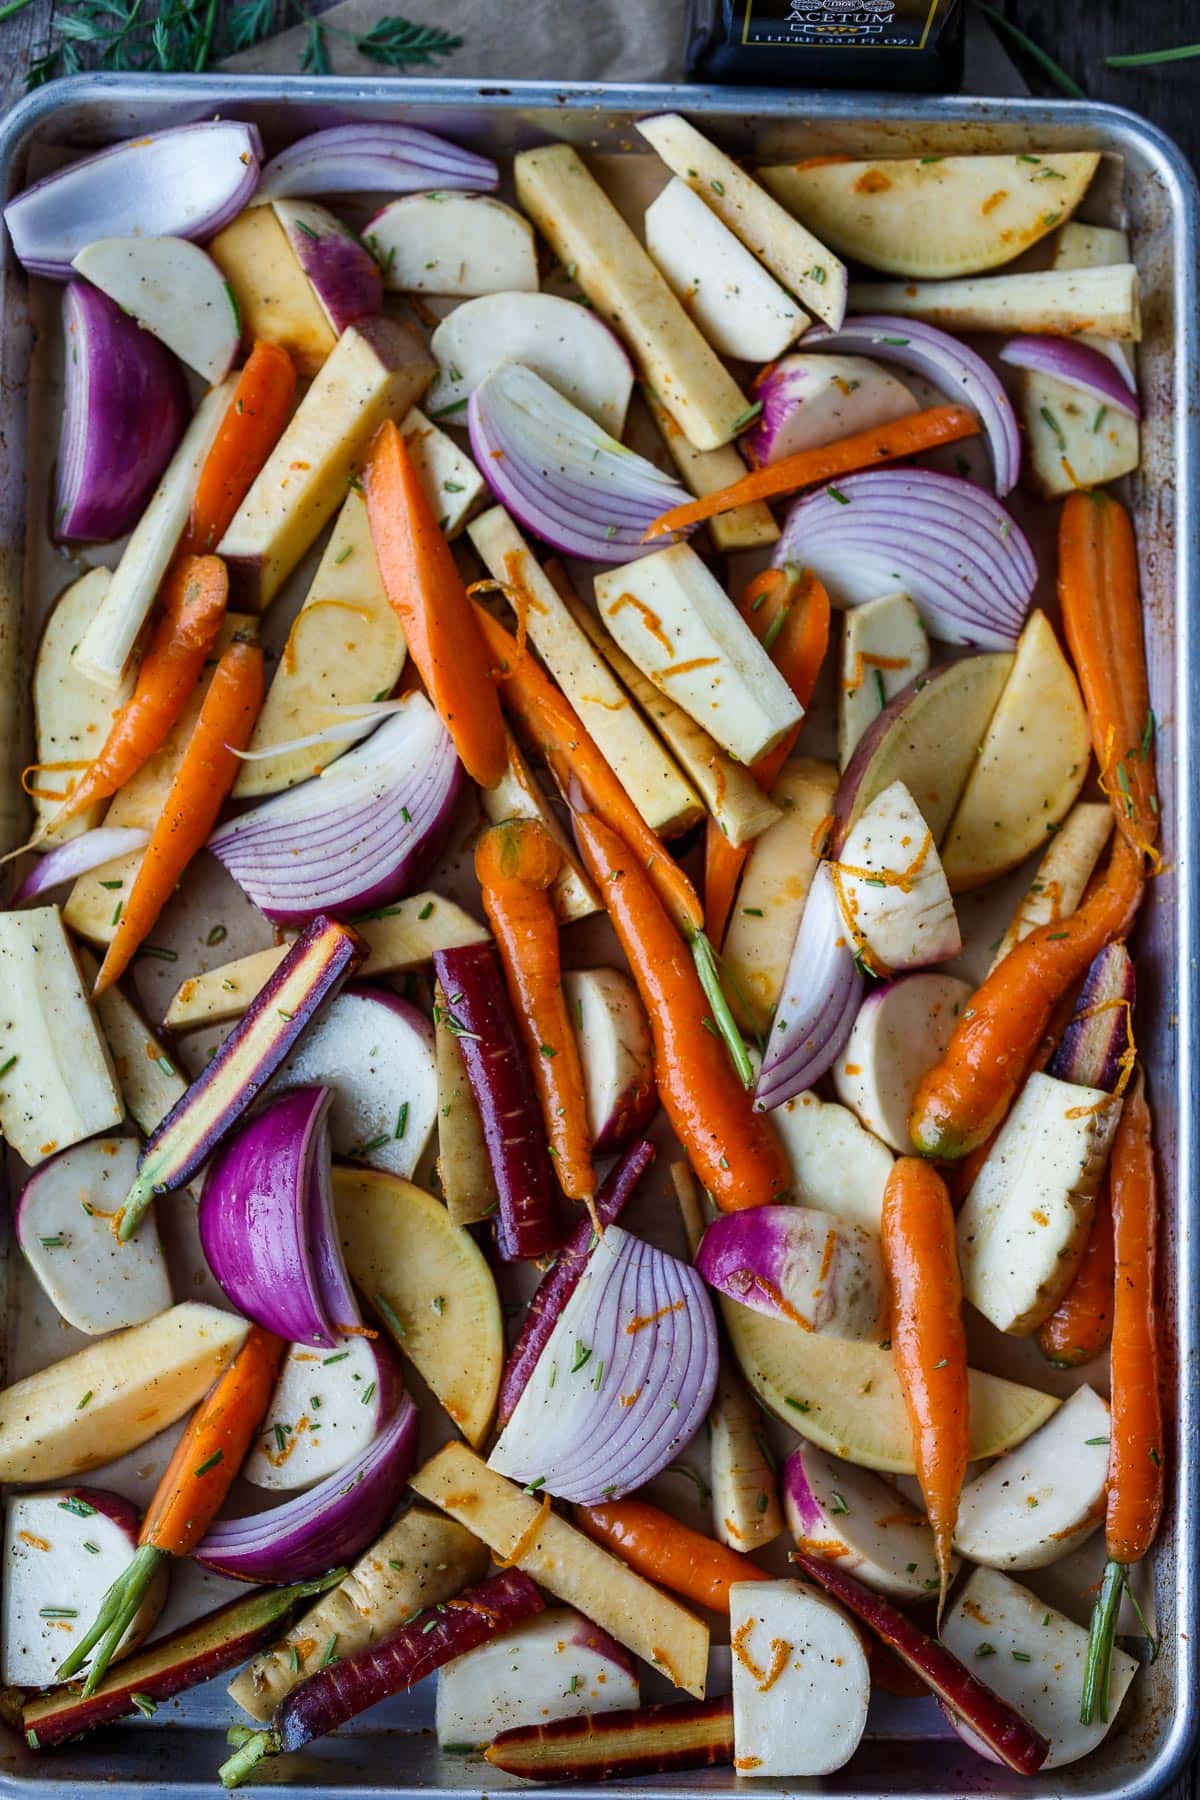 Root vegetables layed out on a tray ready to bake.